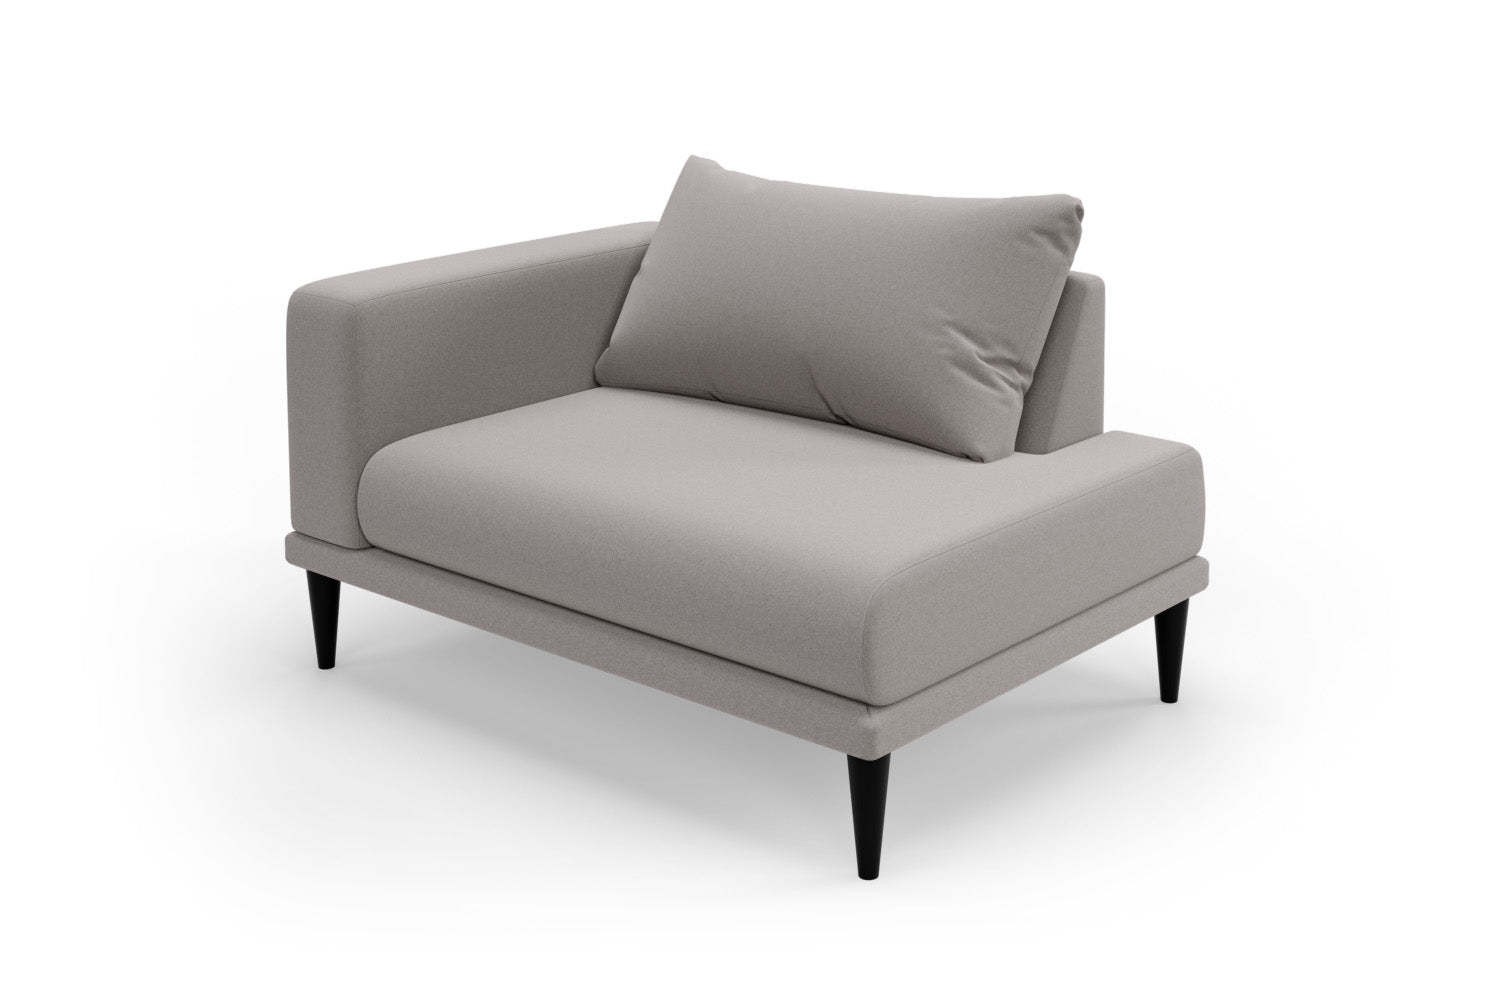 SNUG | The Maverick 1.5 Seater Snuggler Chaise with 1 x Arm in Ash Grey